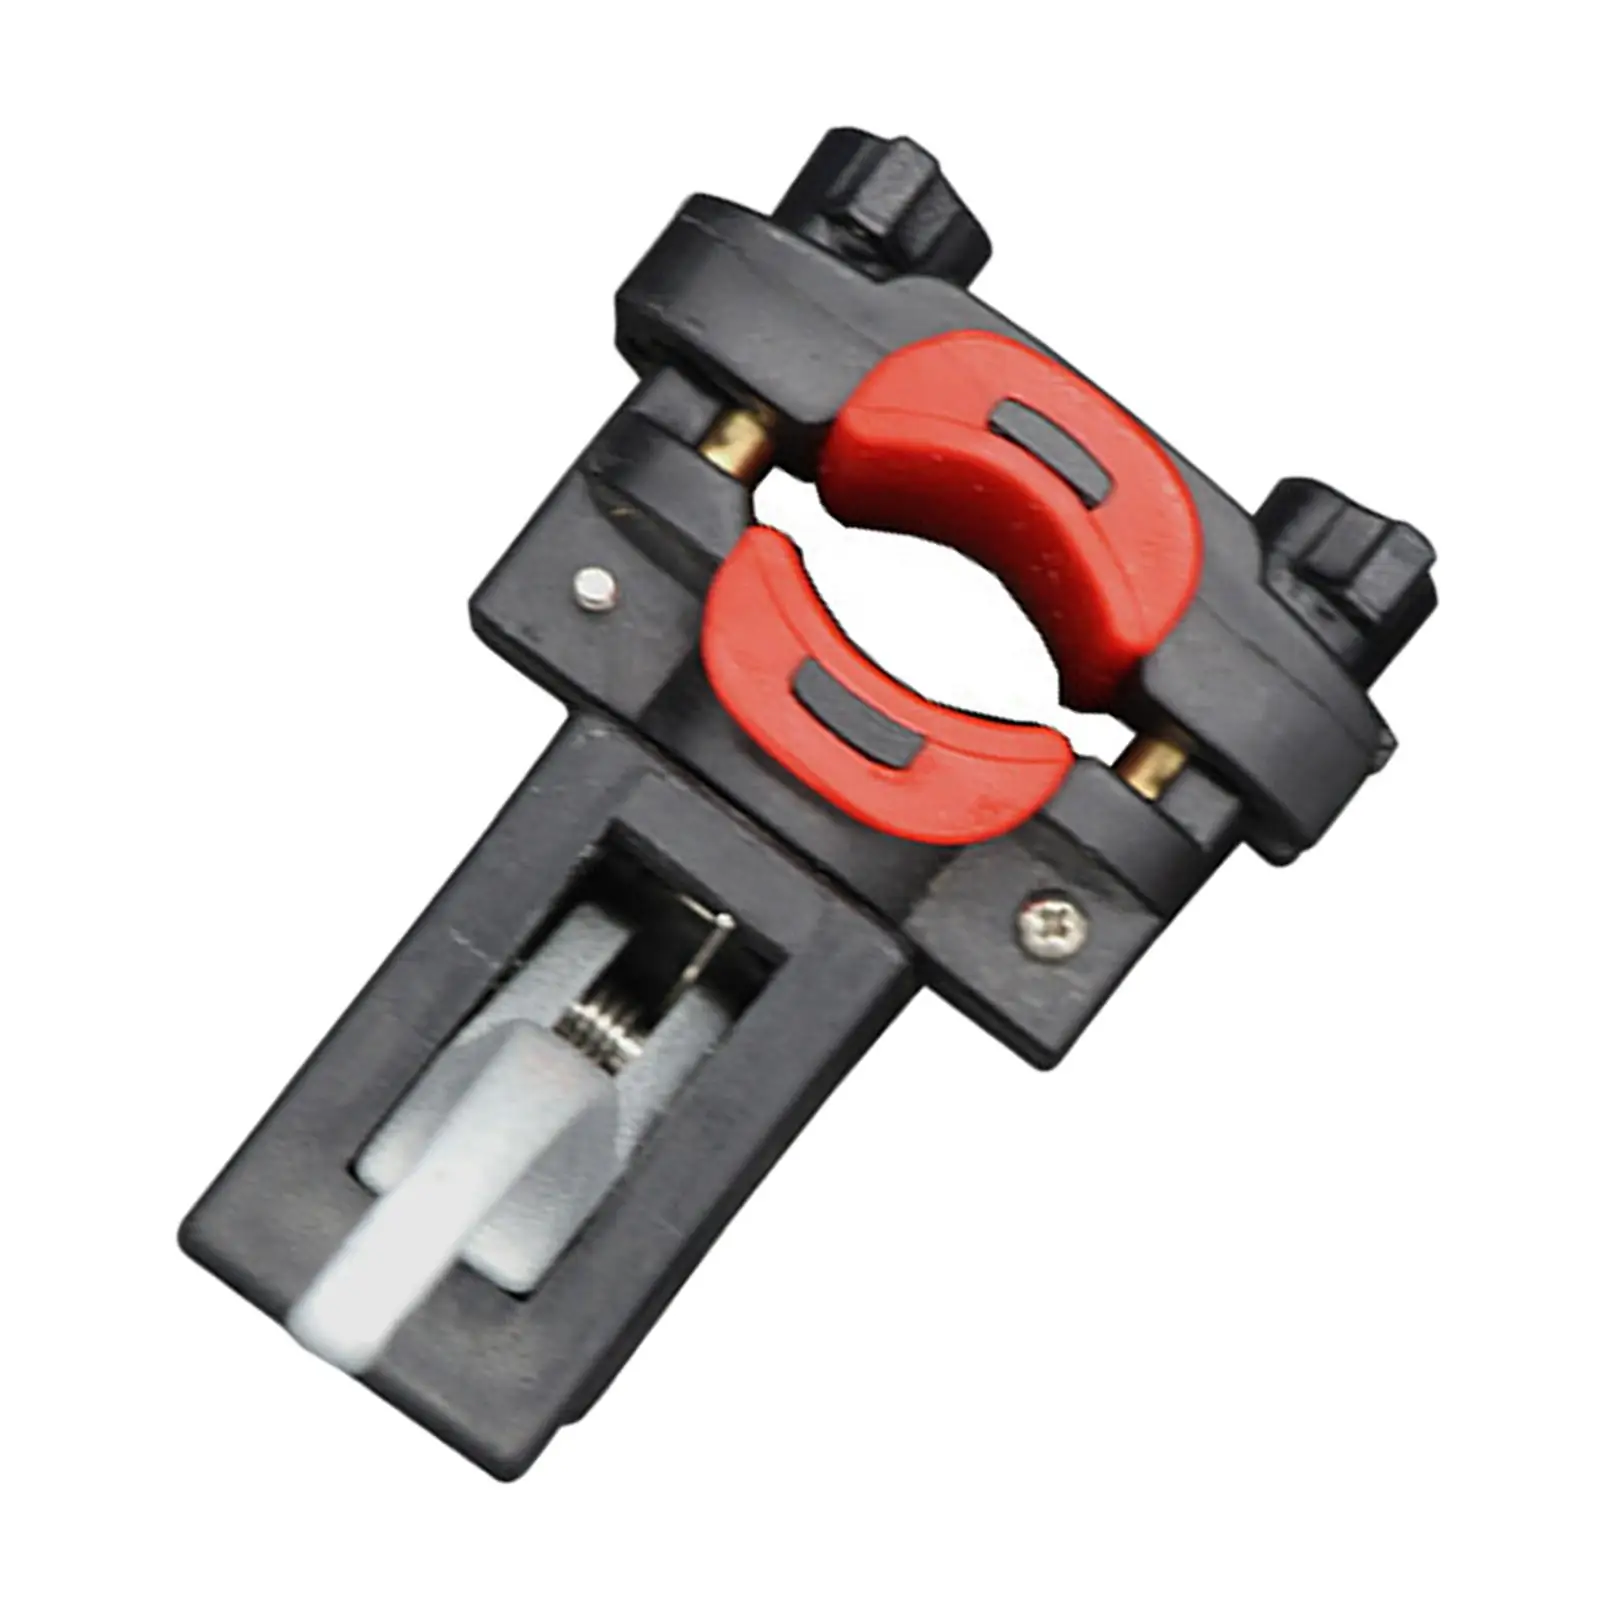 Fishing Rod Holder Fix Bracket with Bolts Adjustable 360 Degree Rotate Protable Fit for BR113P BR311E Brtt4M BR322E BR424M/120B